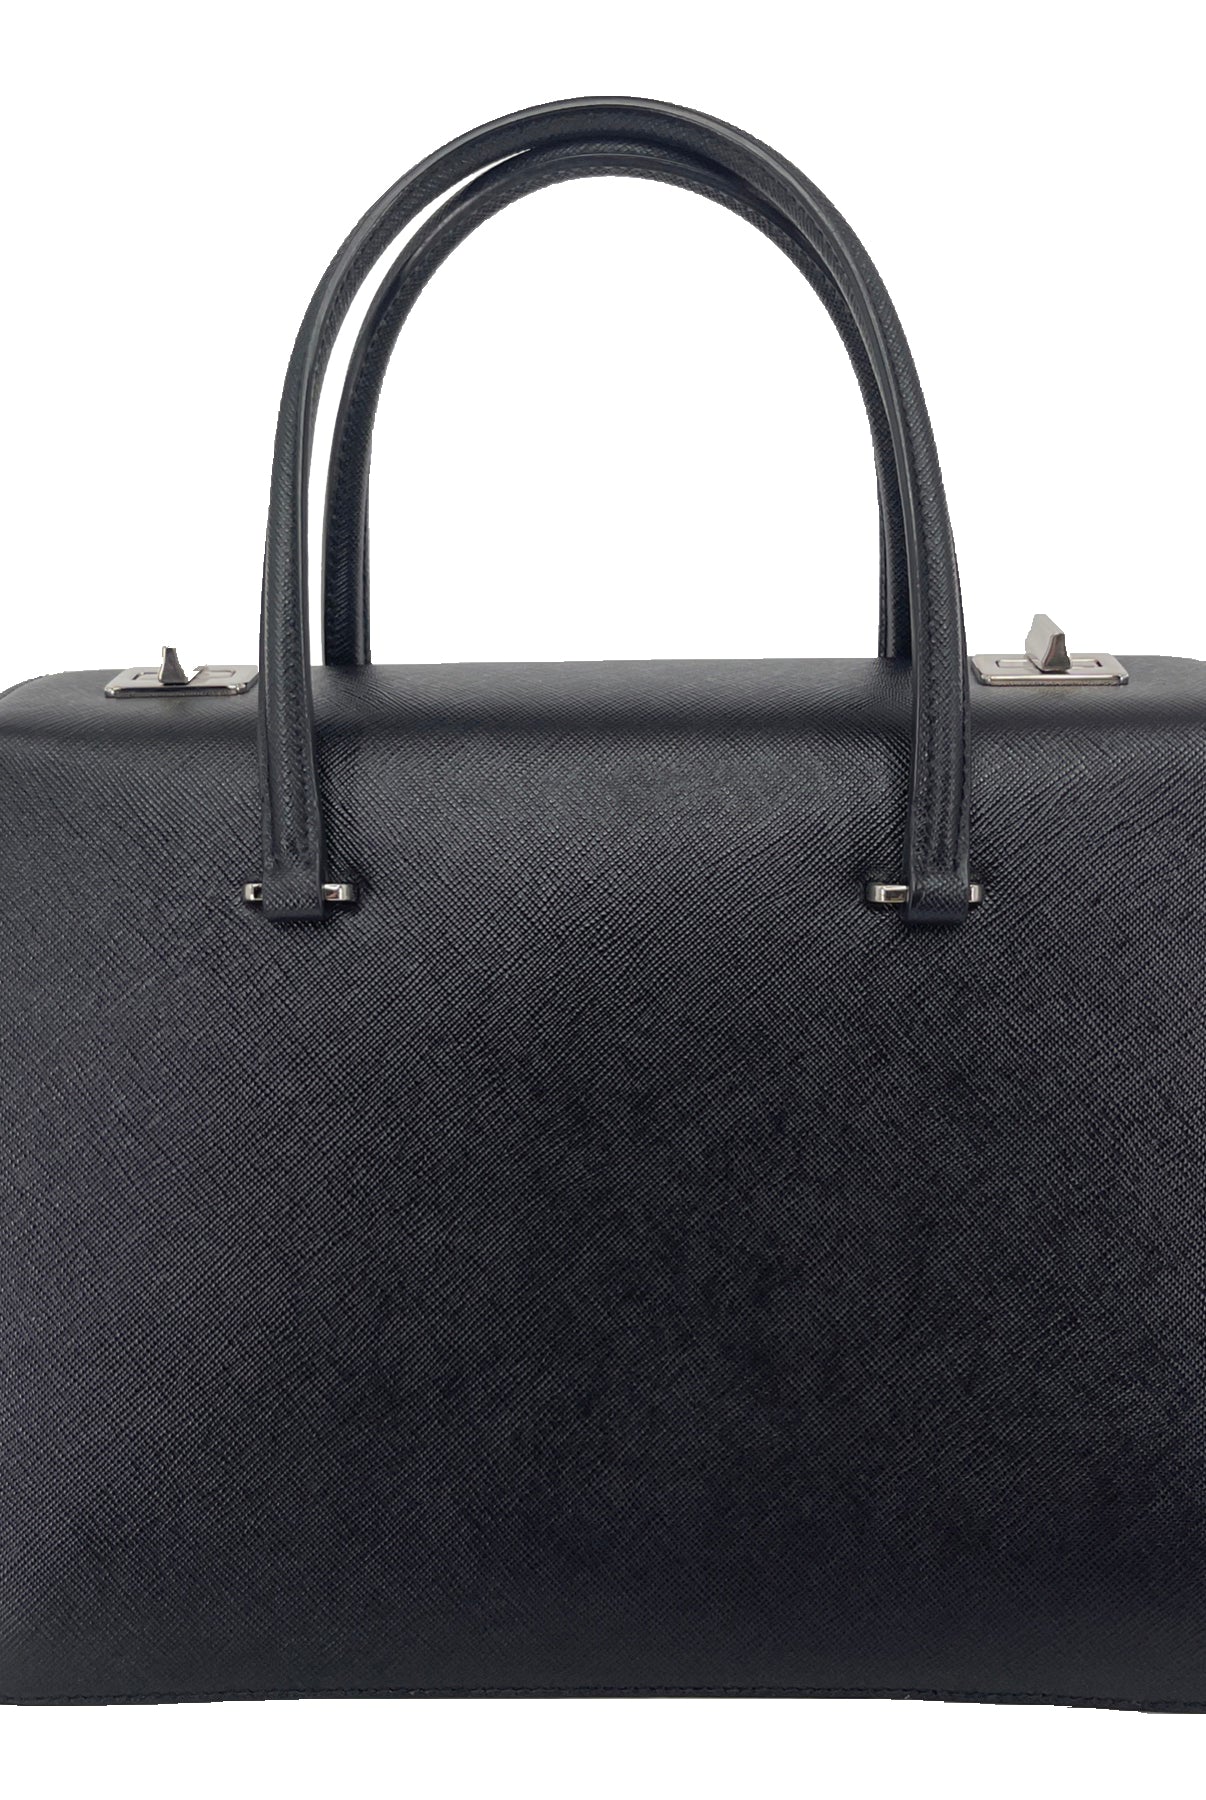 From the Spring/Summer 2014 Collection. Black leather Prada Saffiano Girl Print bag with dual rolled handles at top, silver-tone hardware, girl motif at front face, dual interior compartments, three pockets at interior walls; one with zip closure, one with flap closure and dual turn-lock closures at top. Made in Italy.